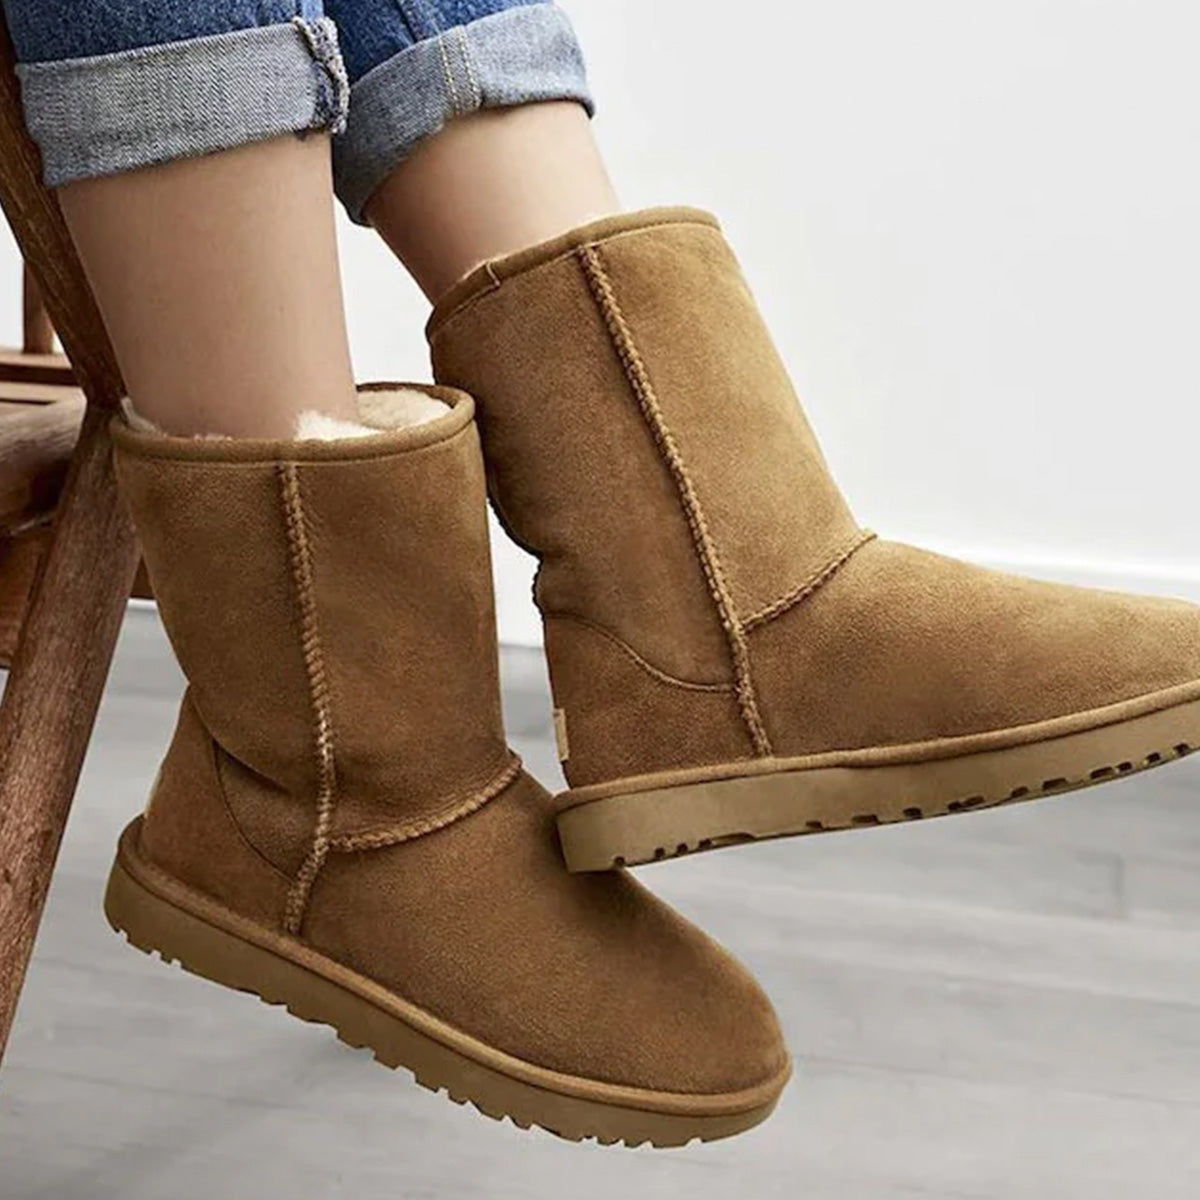 UGG tall boots comfortably stretched to one's size